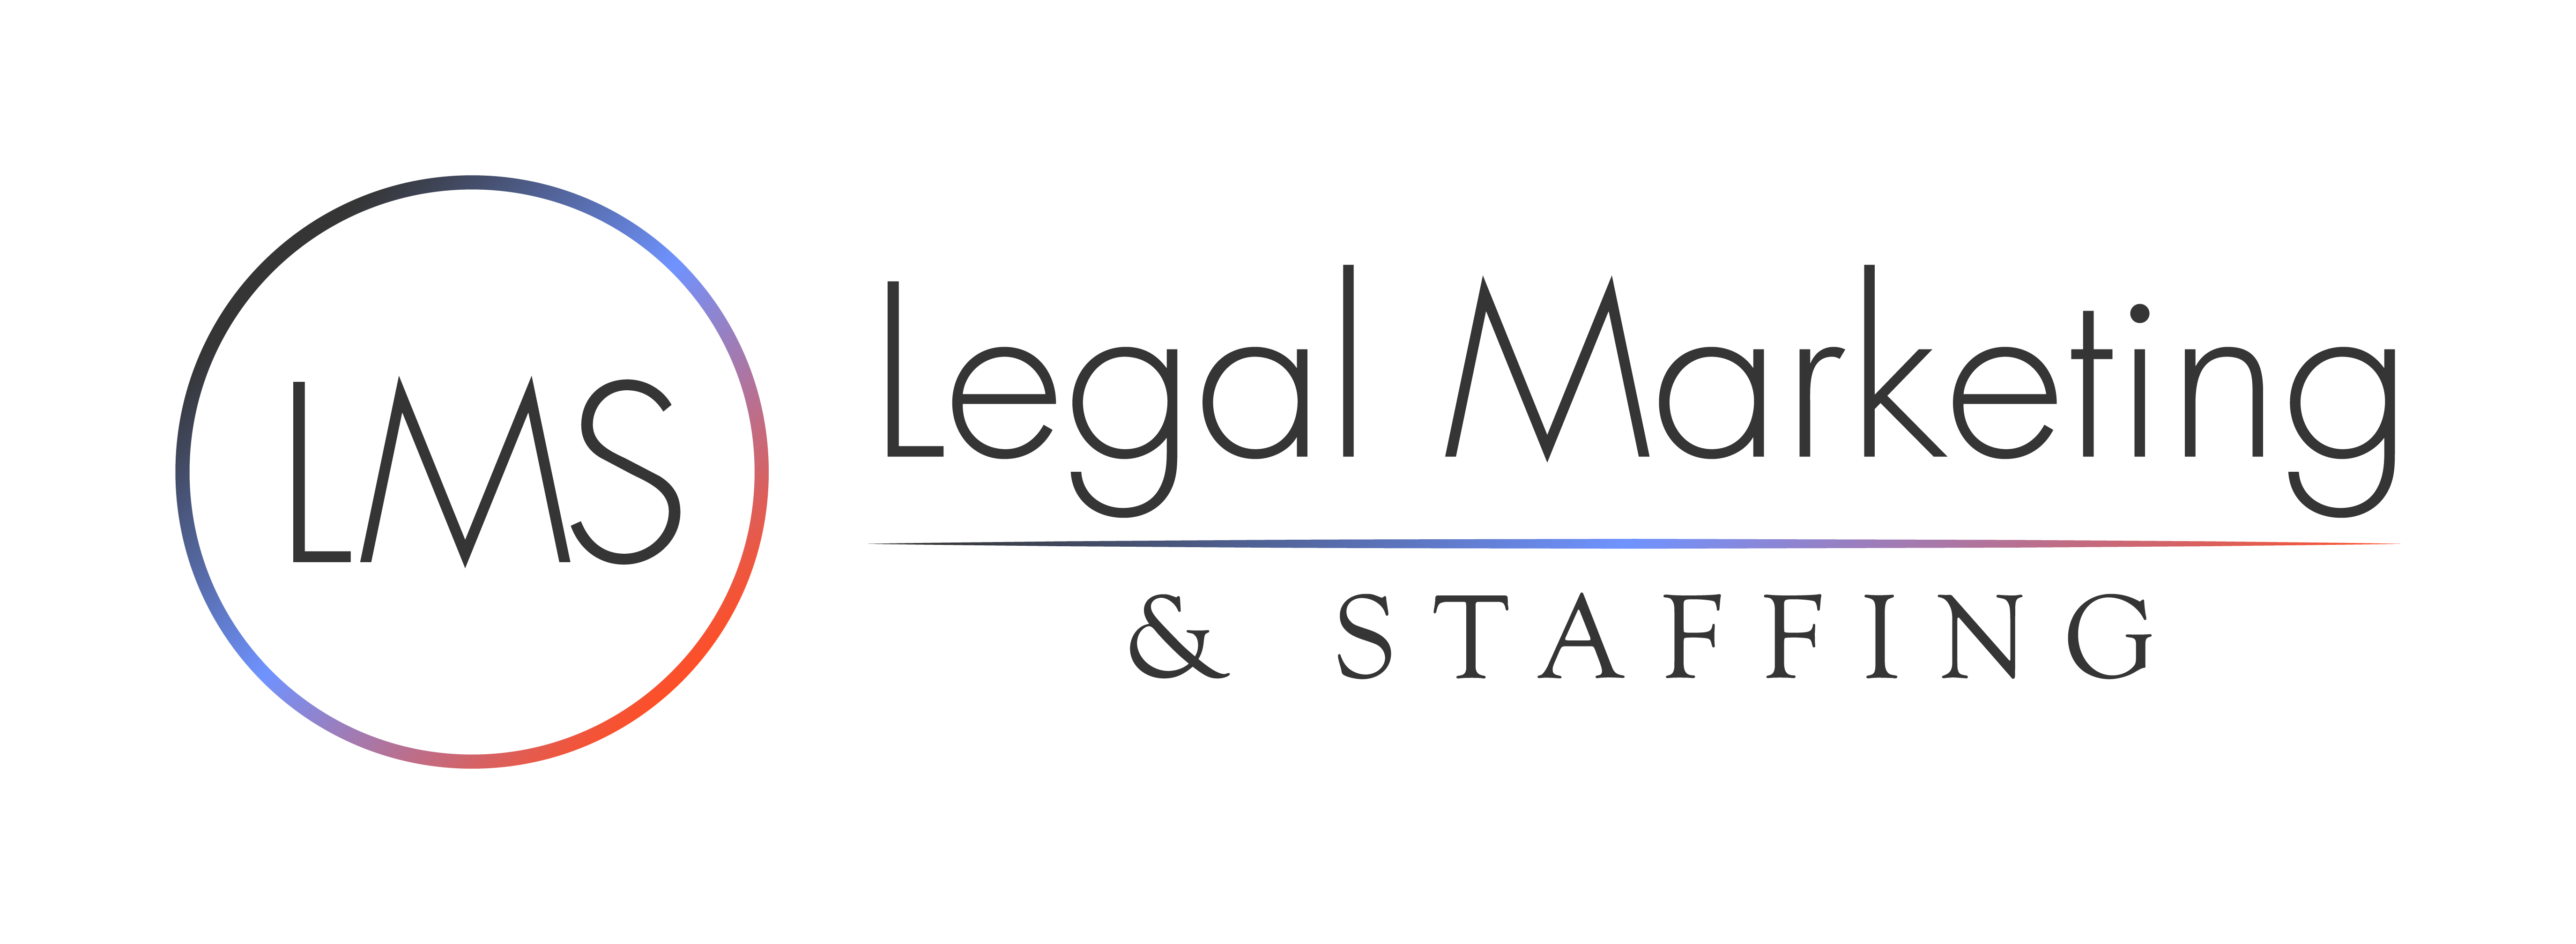 Legal Marketing and Staffing Logo